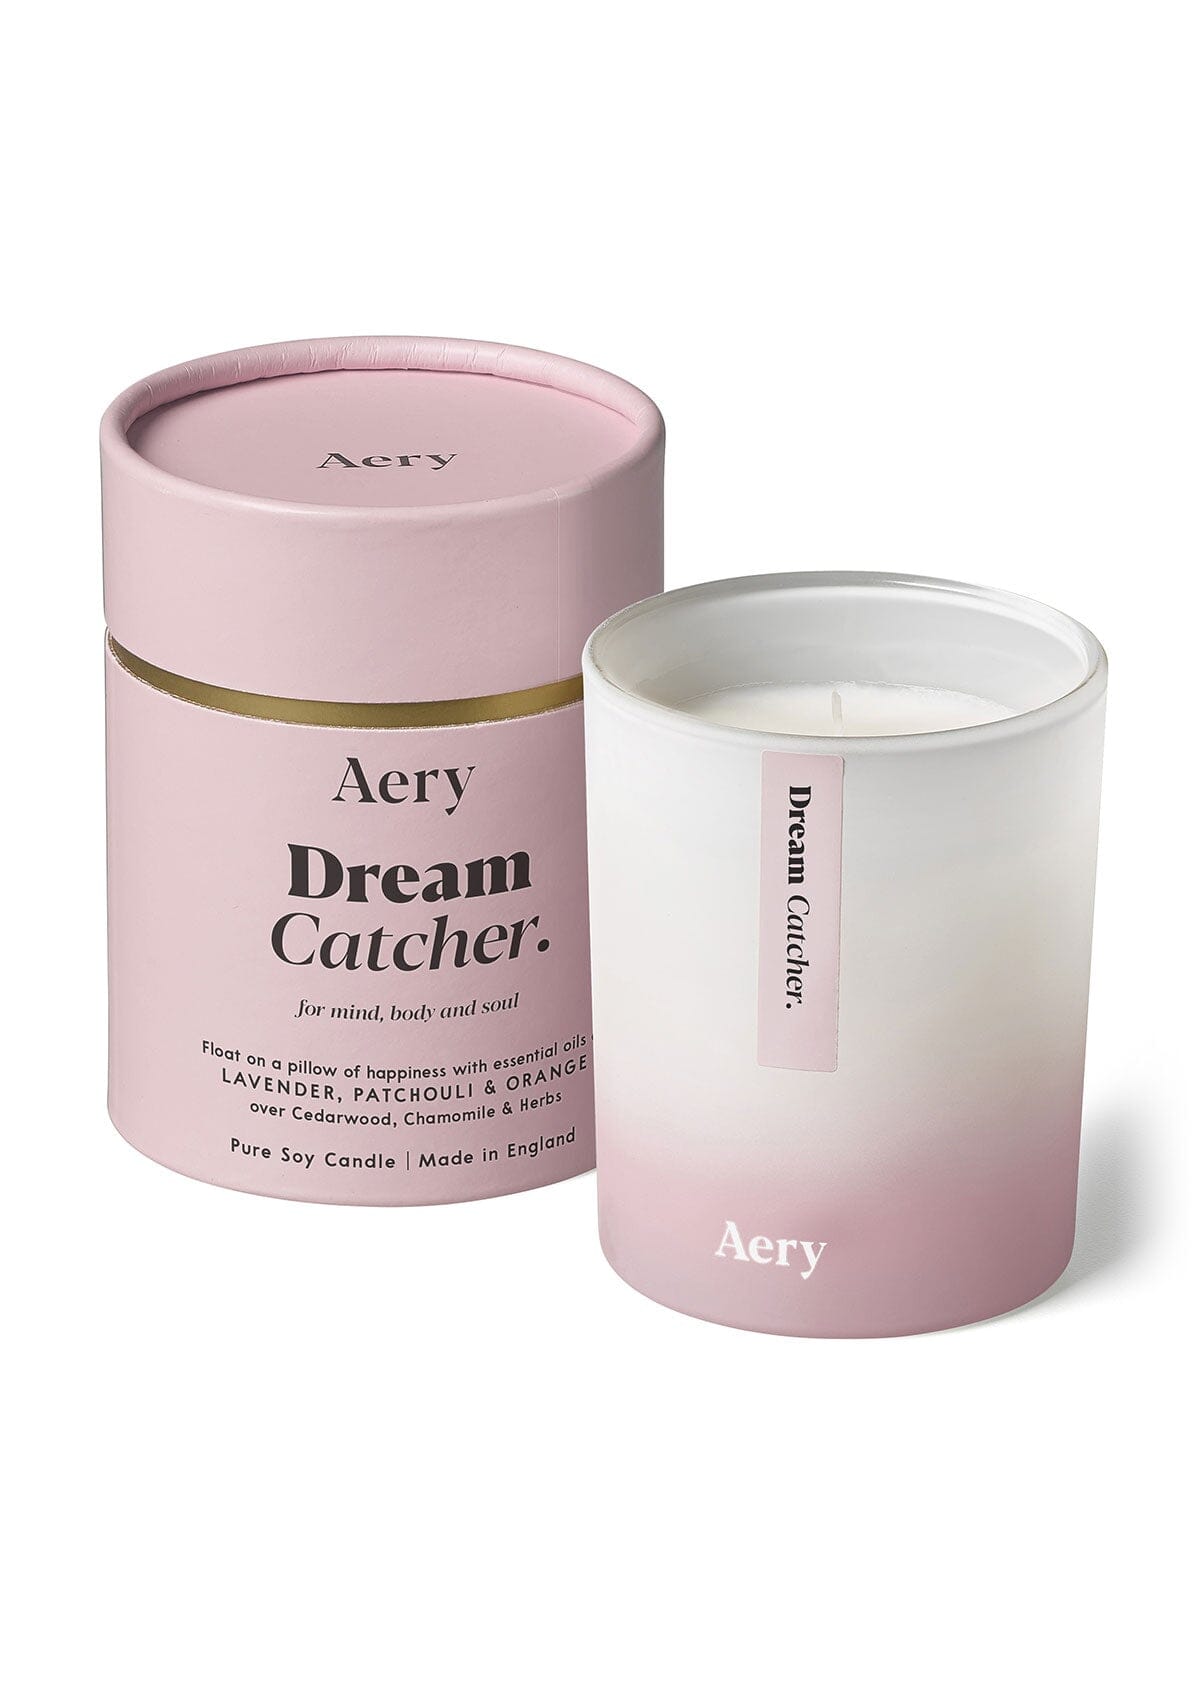 Lilac dream catcher scented candle with product packaging by Aery 